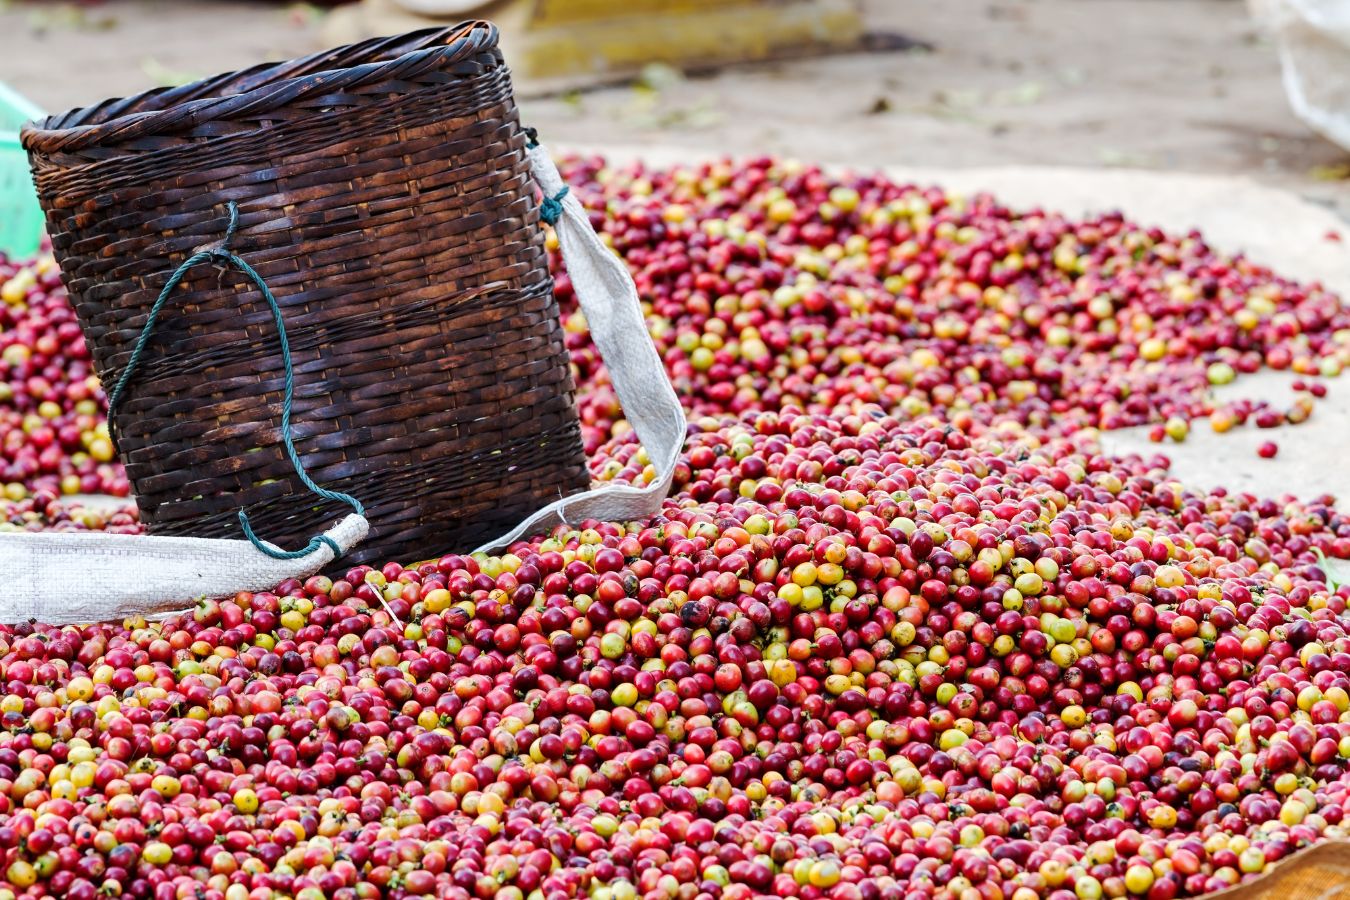 Coffee Berries - Frequently Asked Questions